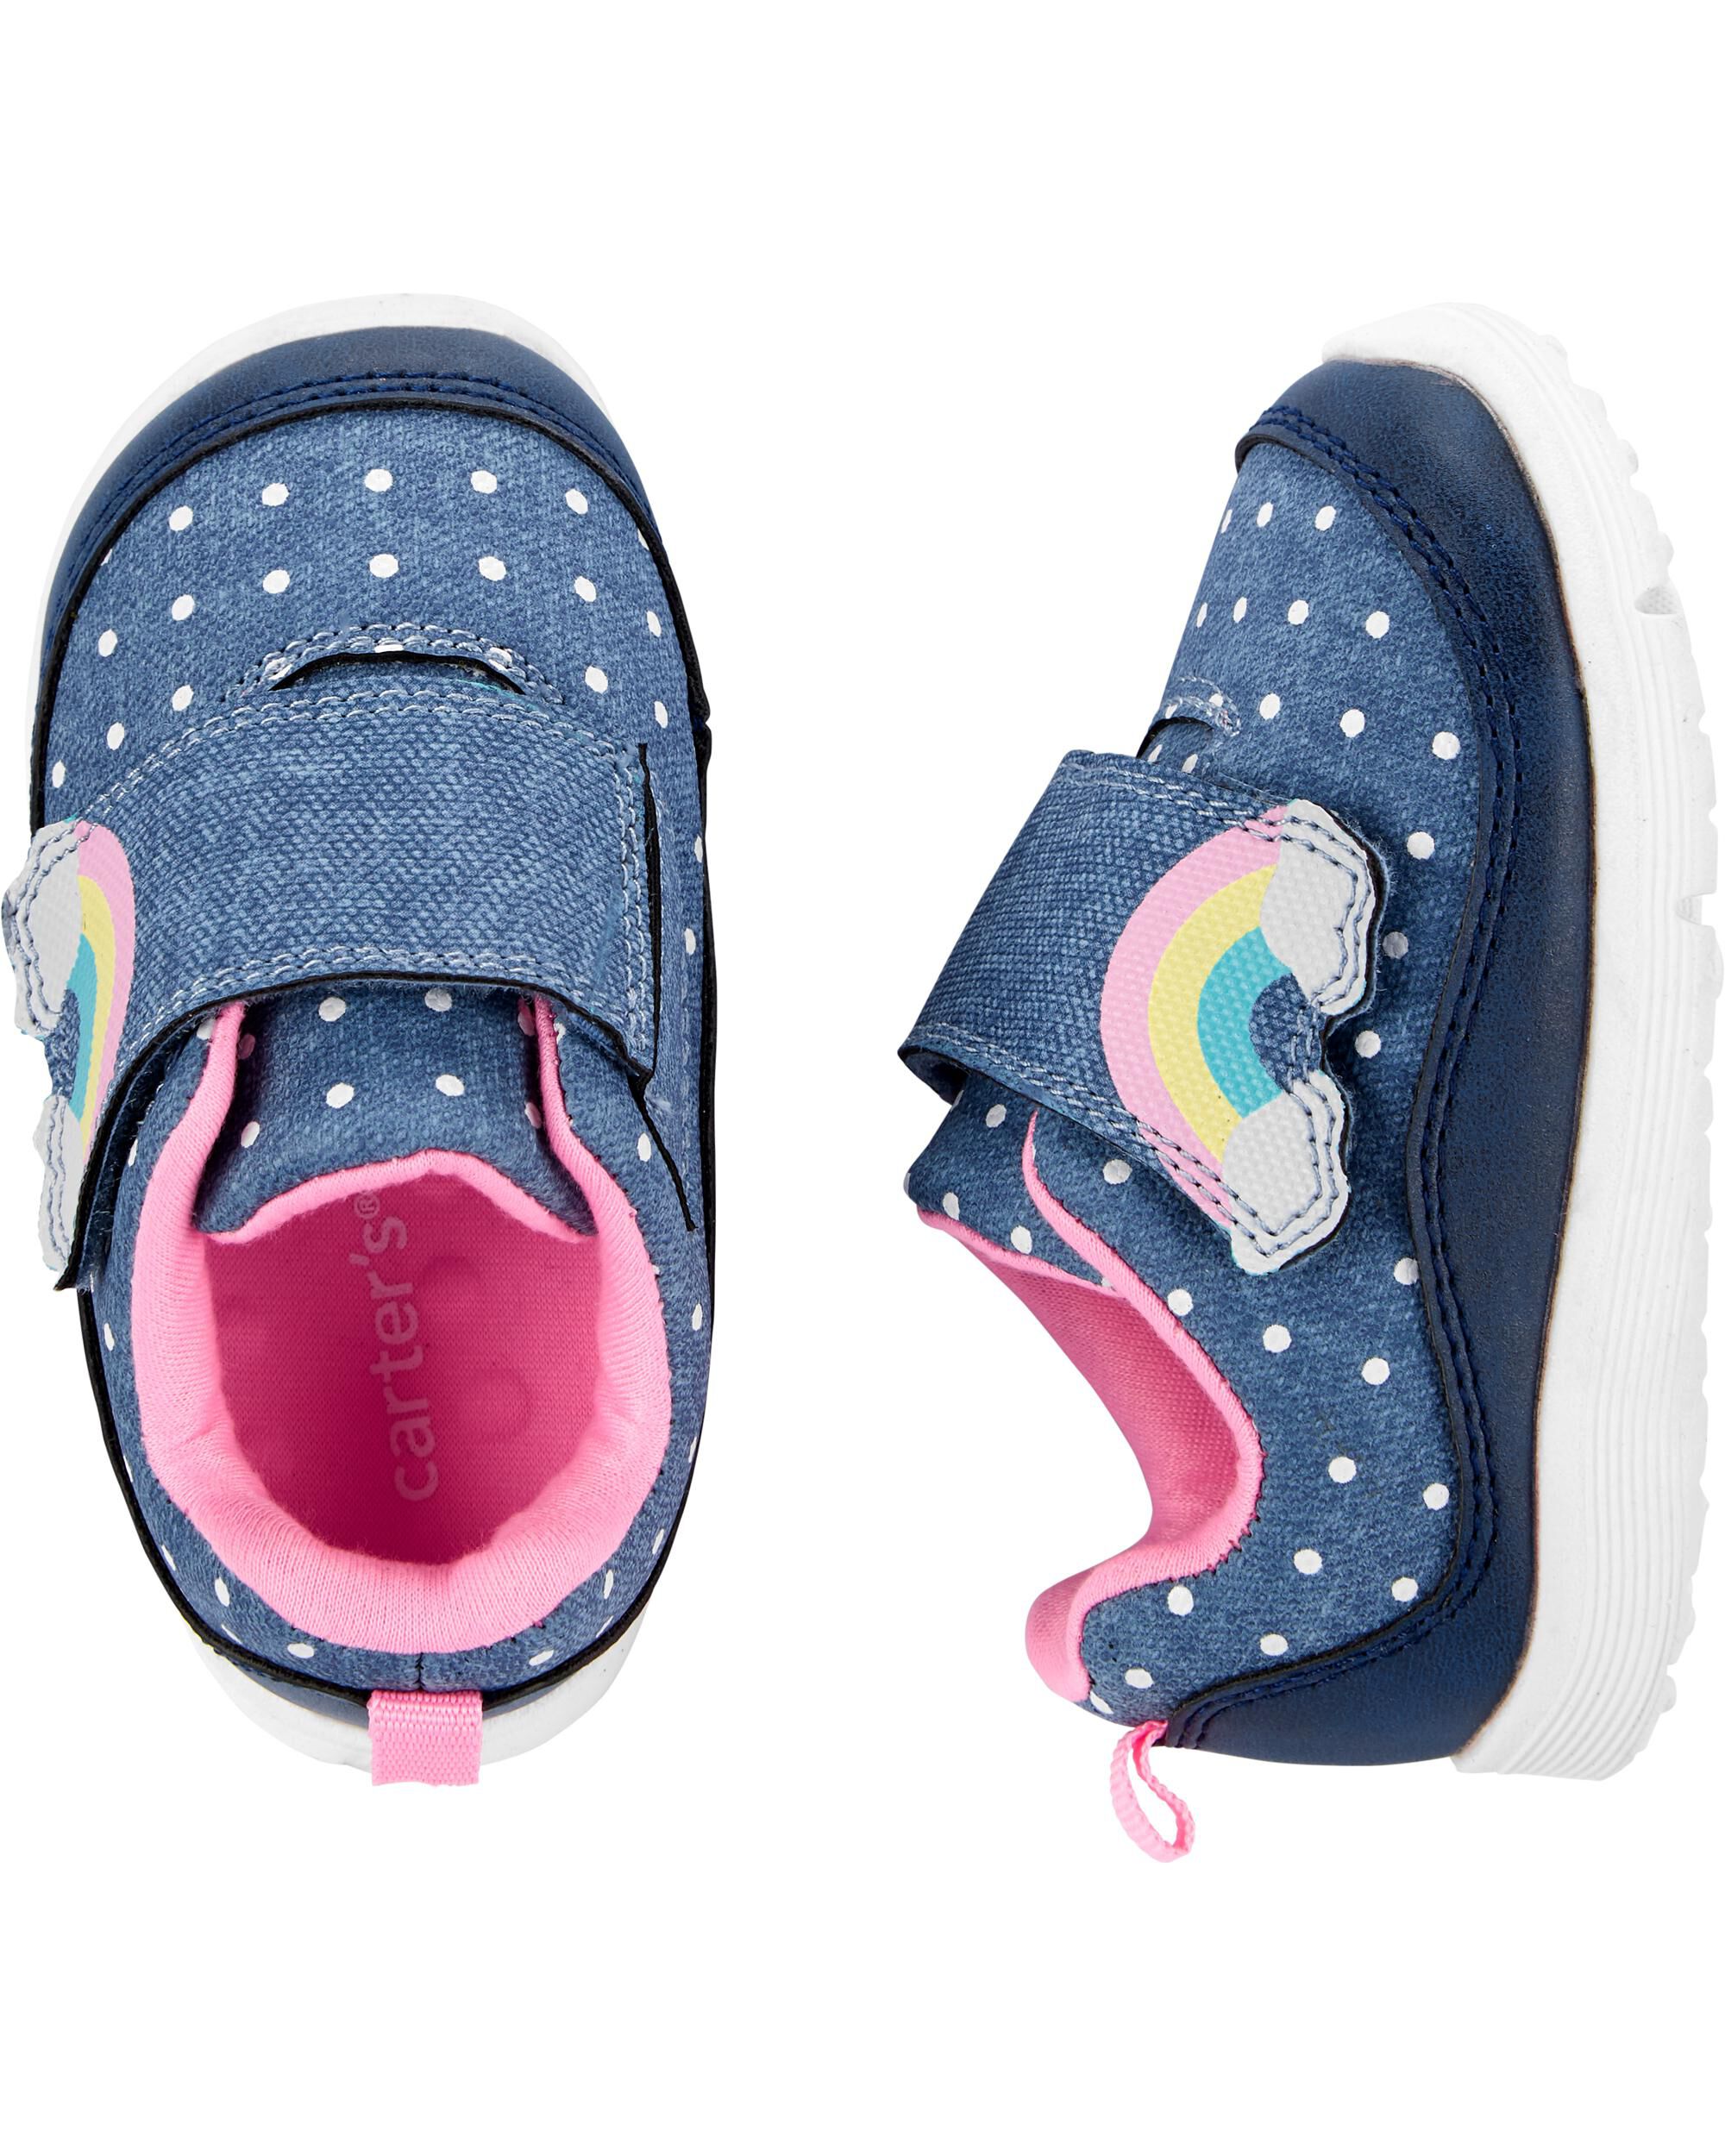 Carter's Rainbow Sneaker Baby Shoes 